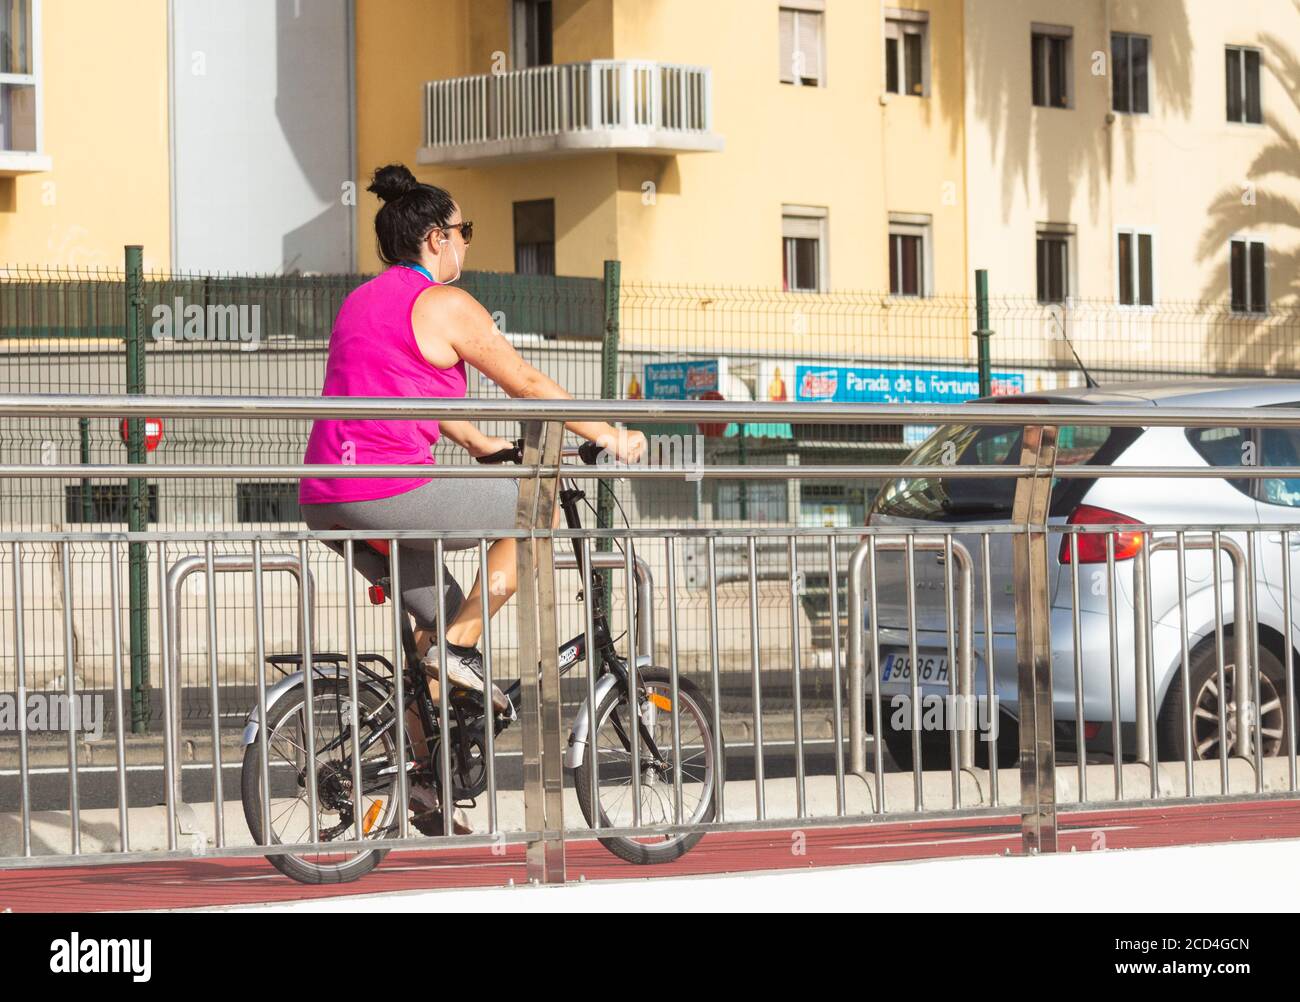 Cycle path segregated from traffic in Las Palmas city side viewon Gran Canaria, Canary Islands, Spain. Stock Photo